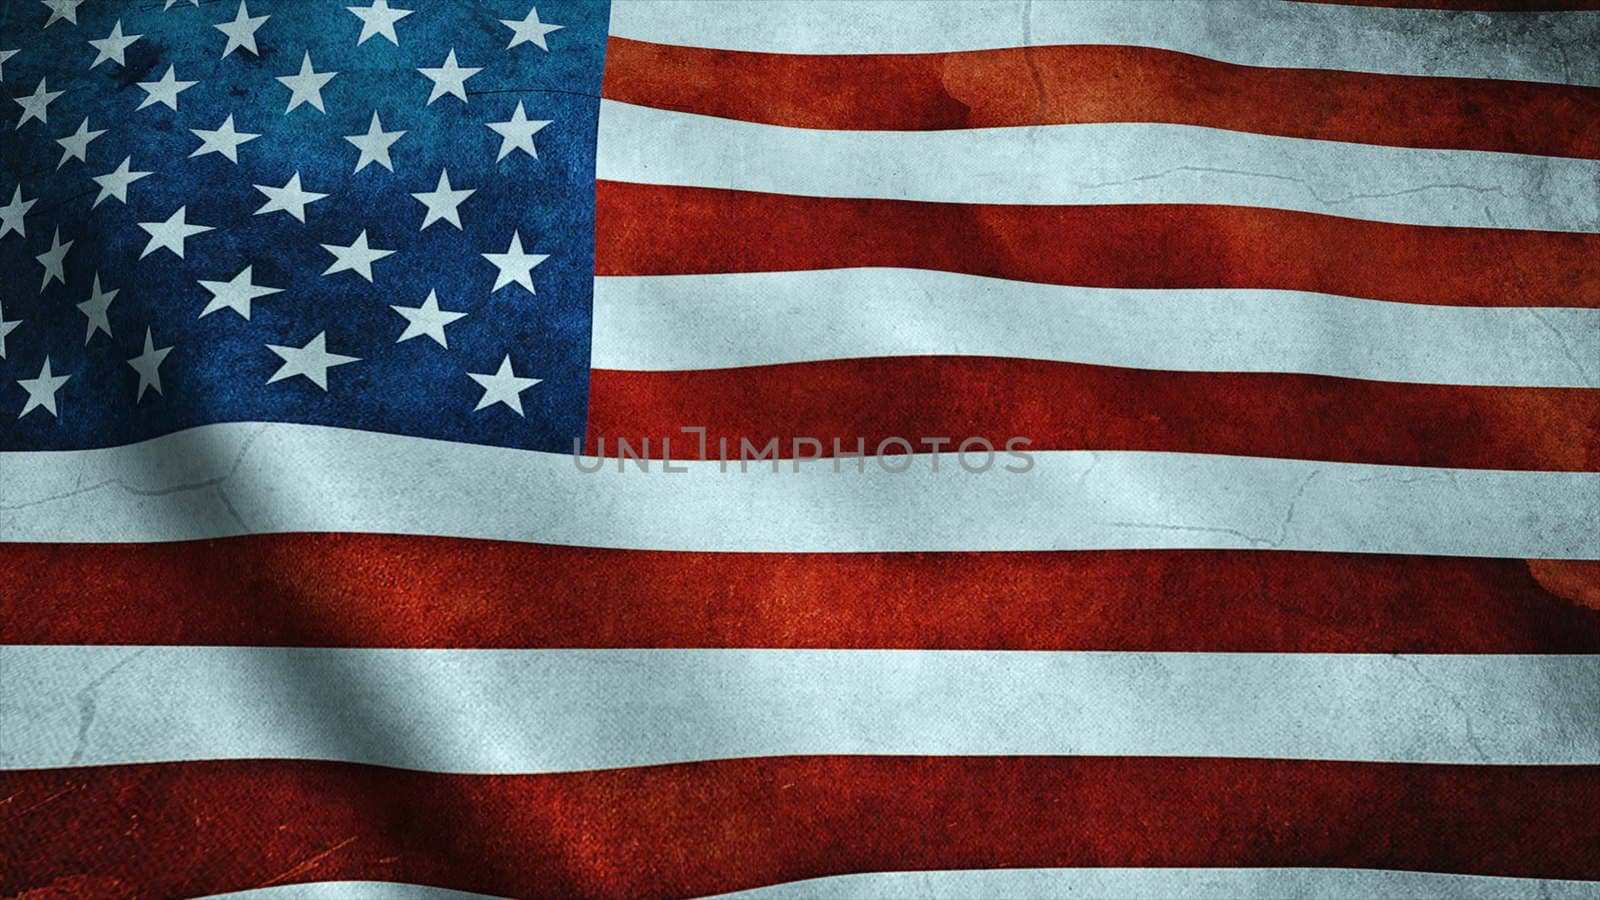 Realistic Ultra-HD flag of the USA waving in the wind. Seamless loop with highly detailed fabric texture. Loop ready in 4k resolution.